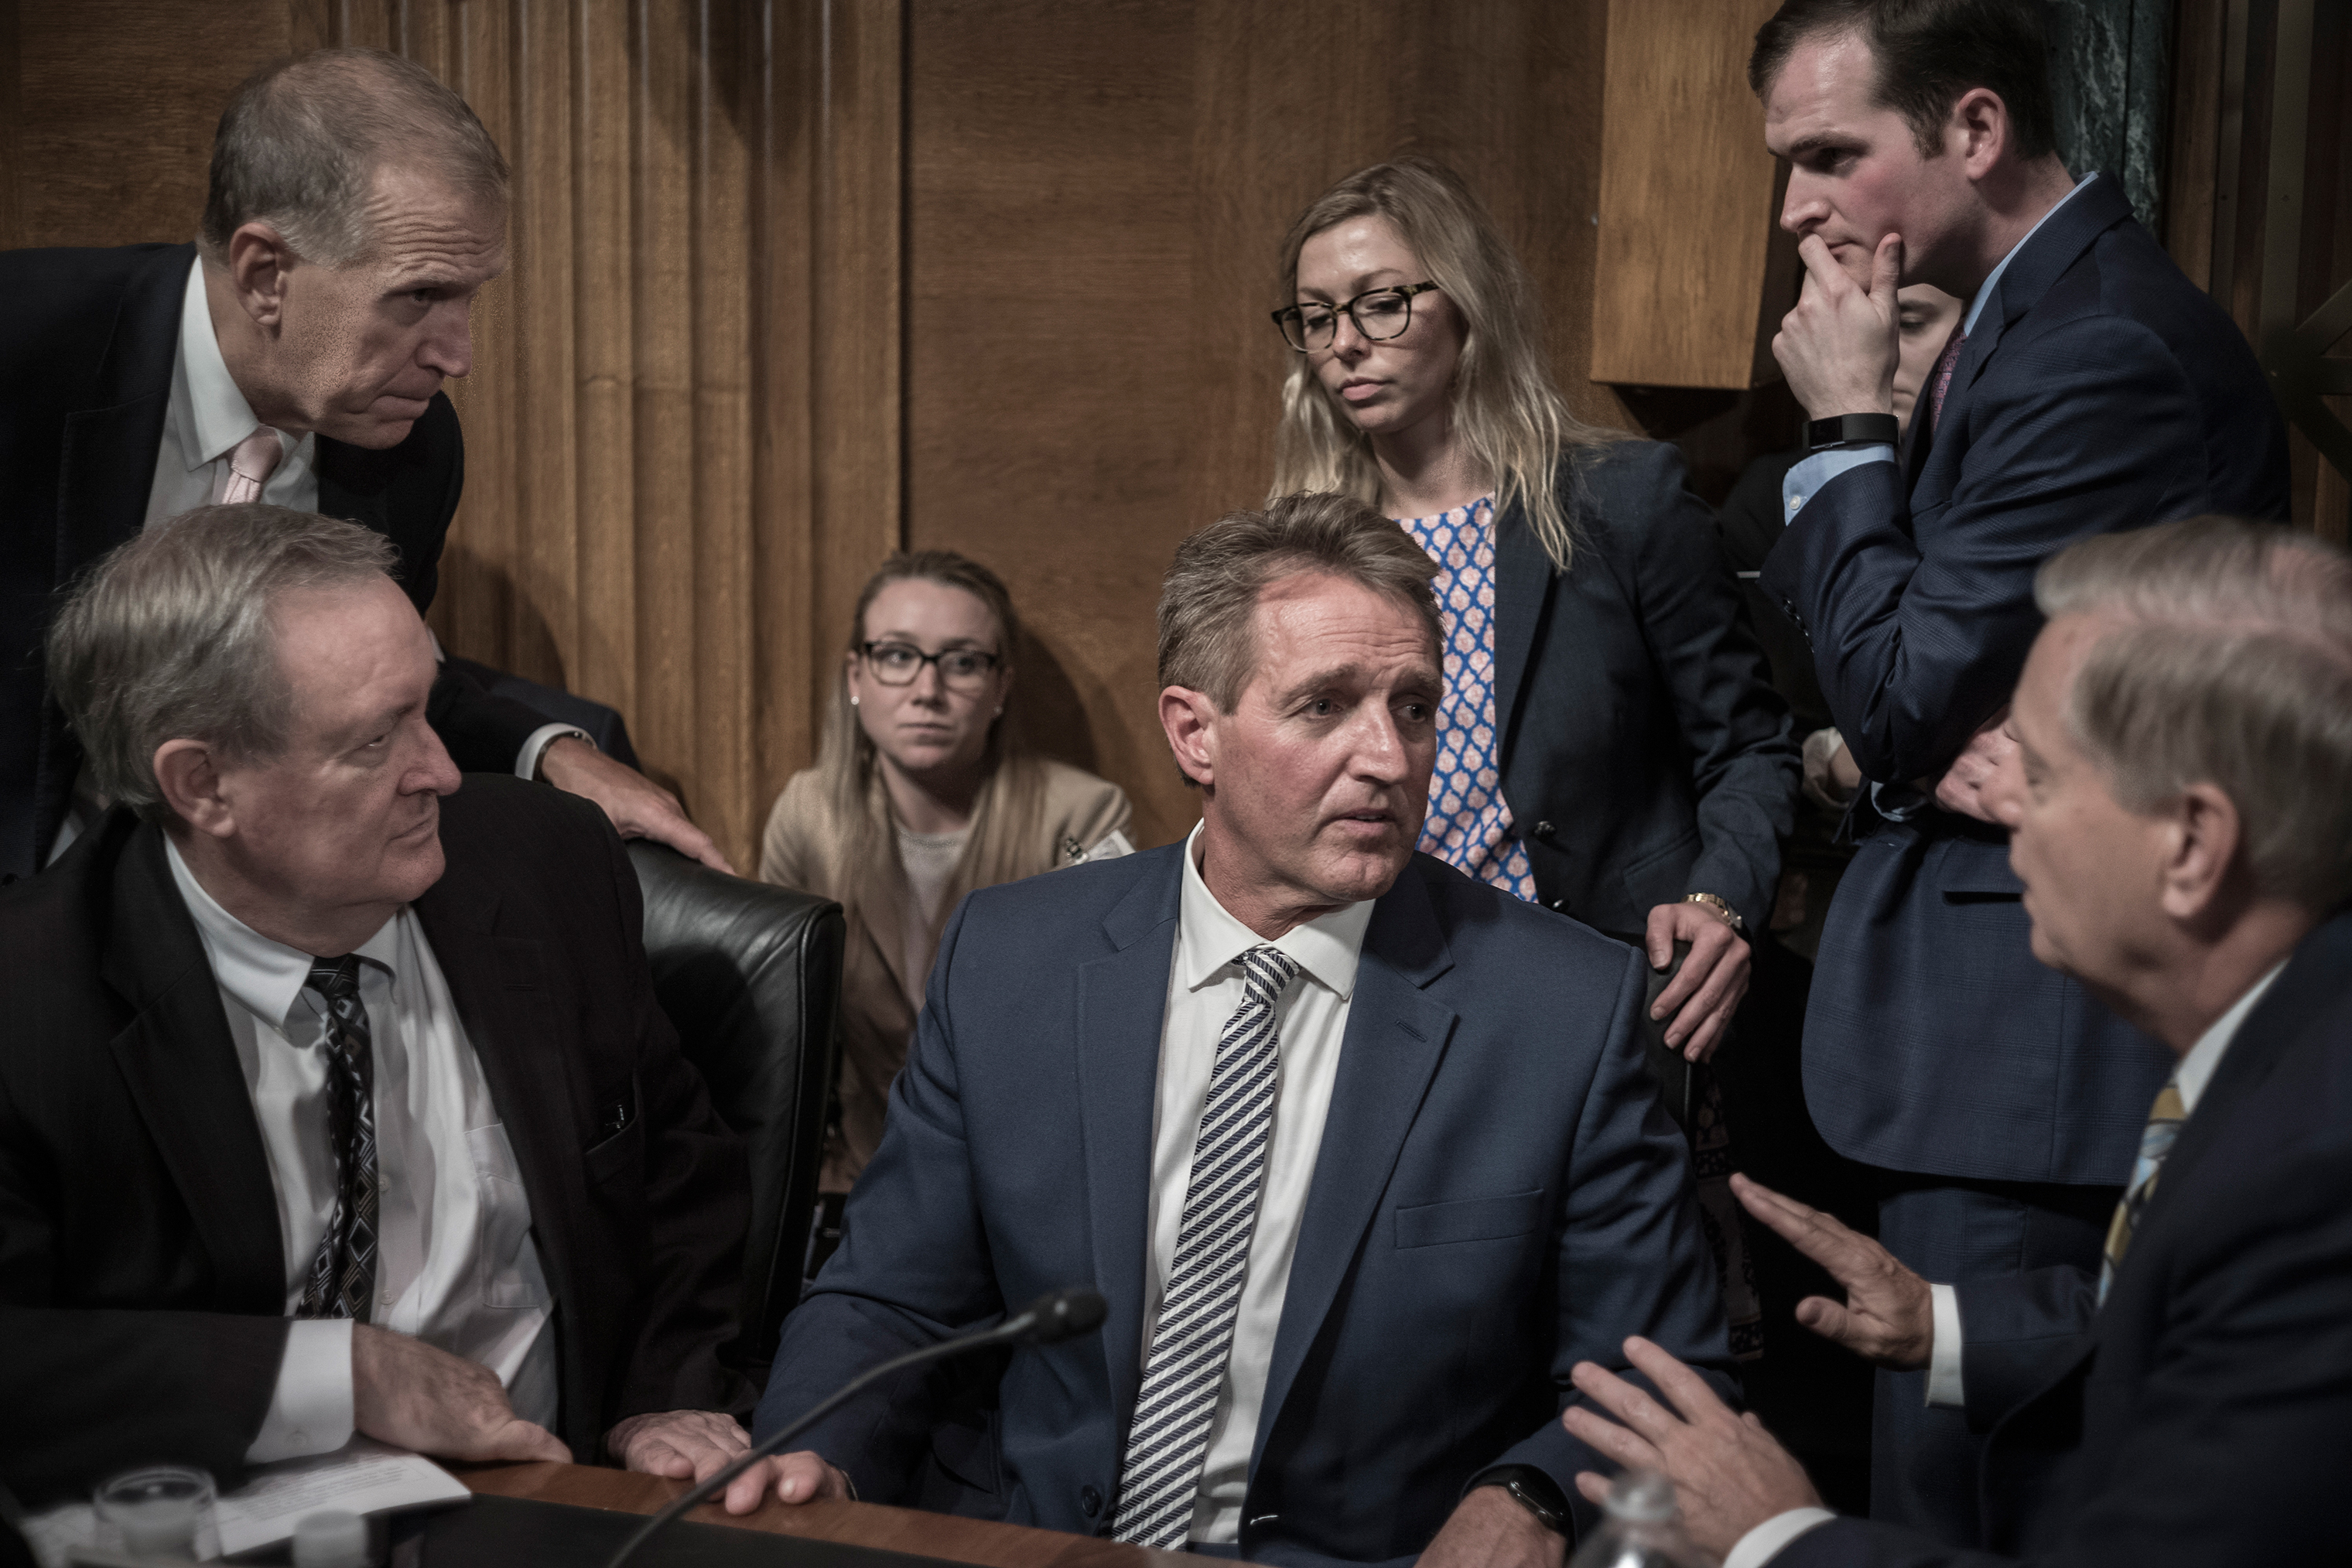 Jeff Flake, center, listens to fellow GOP Senator Lindsey Graham, right, on Sept. 28, moments after Flake called for a delay in Brett Kavanaugh’s Supreme Court confirmation. His change of heart proved brief; eight days later he joined a slim majority to elevate Kavanaugh to the bench. (David Butow—Redux for TIME)